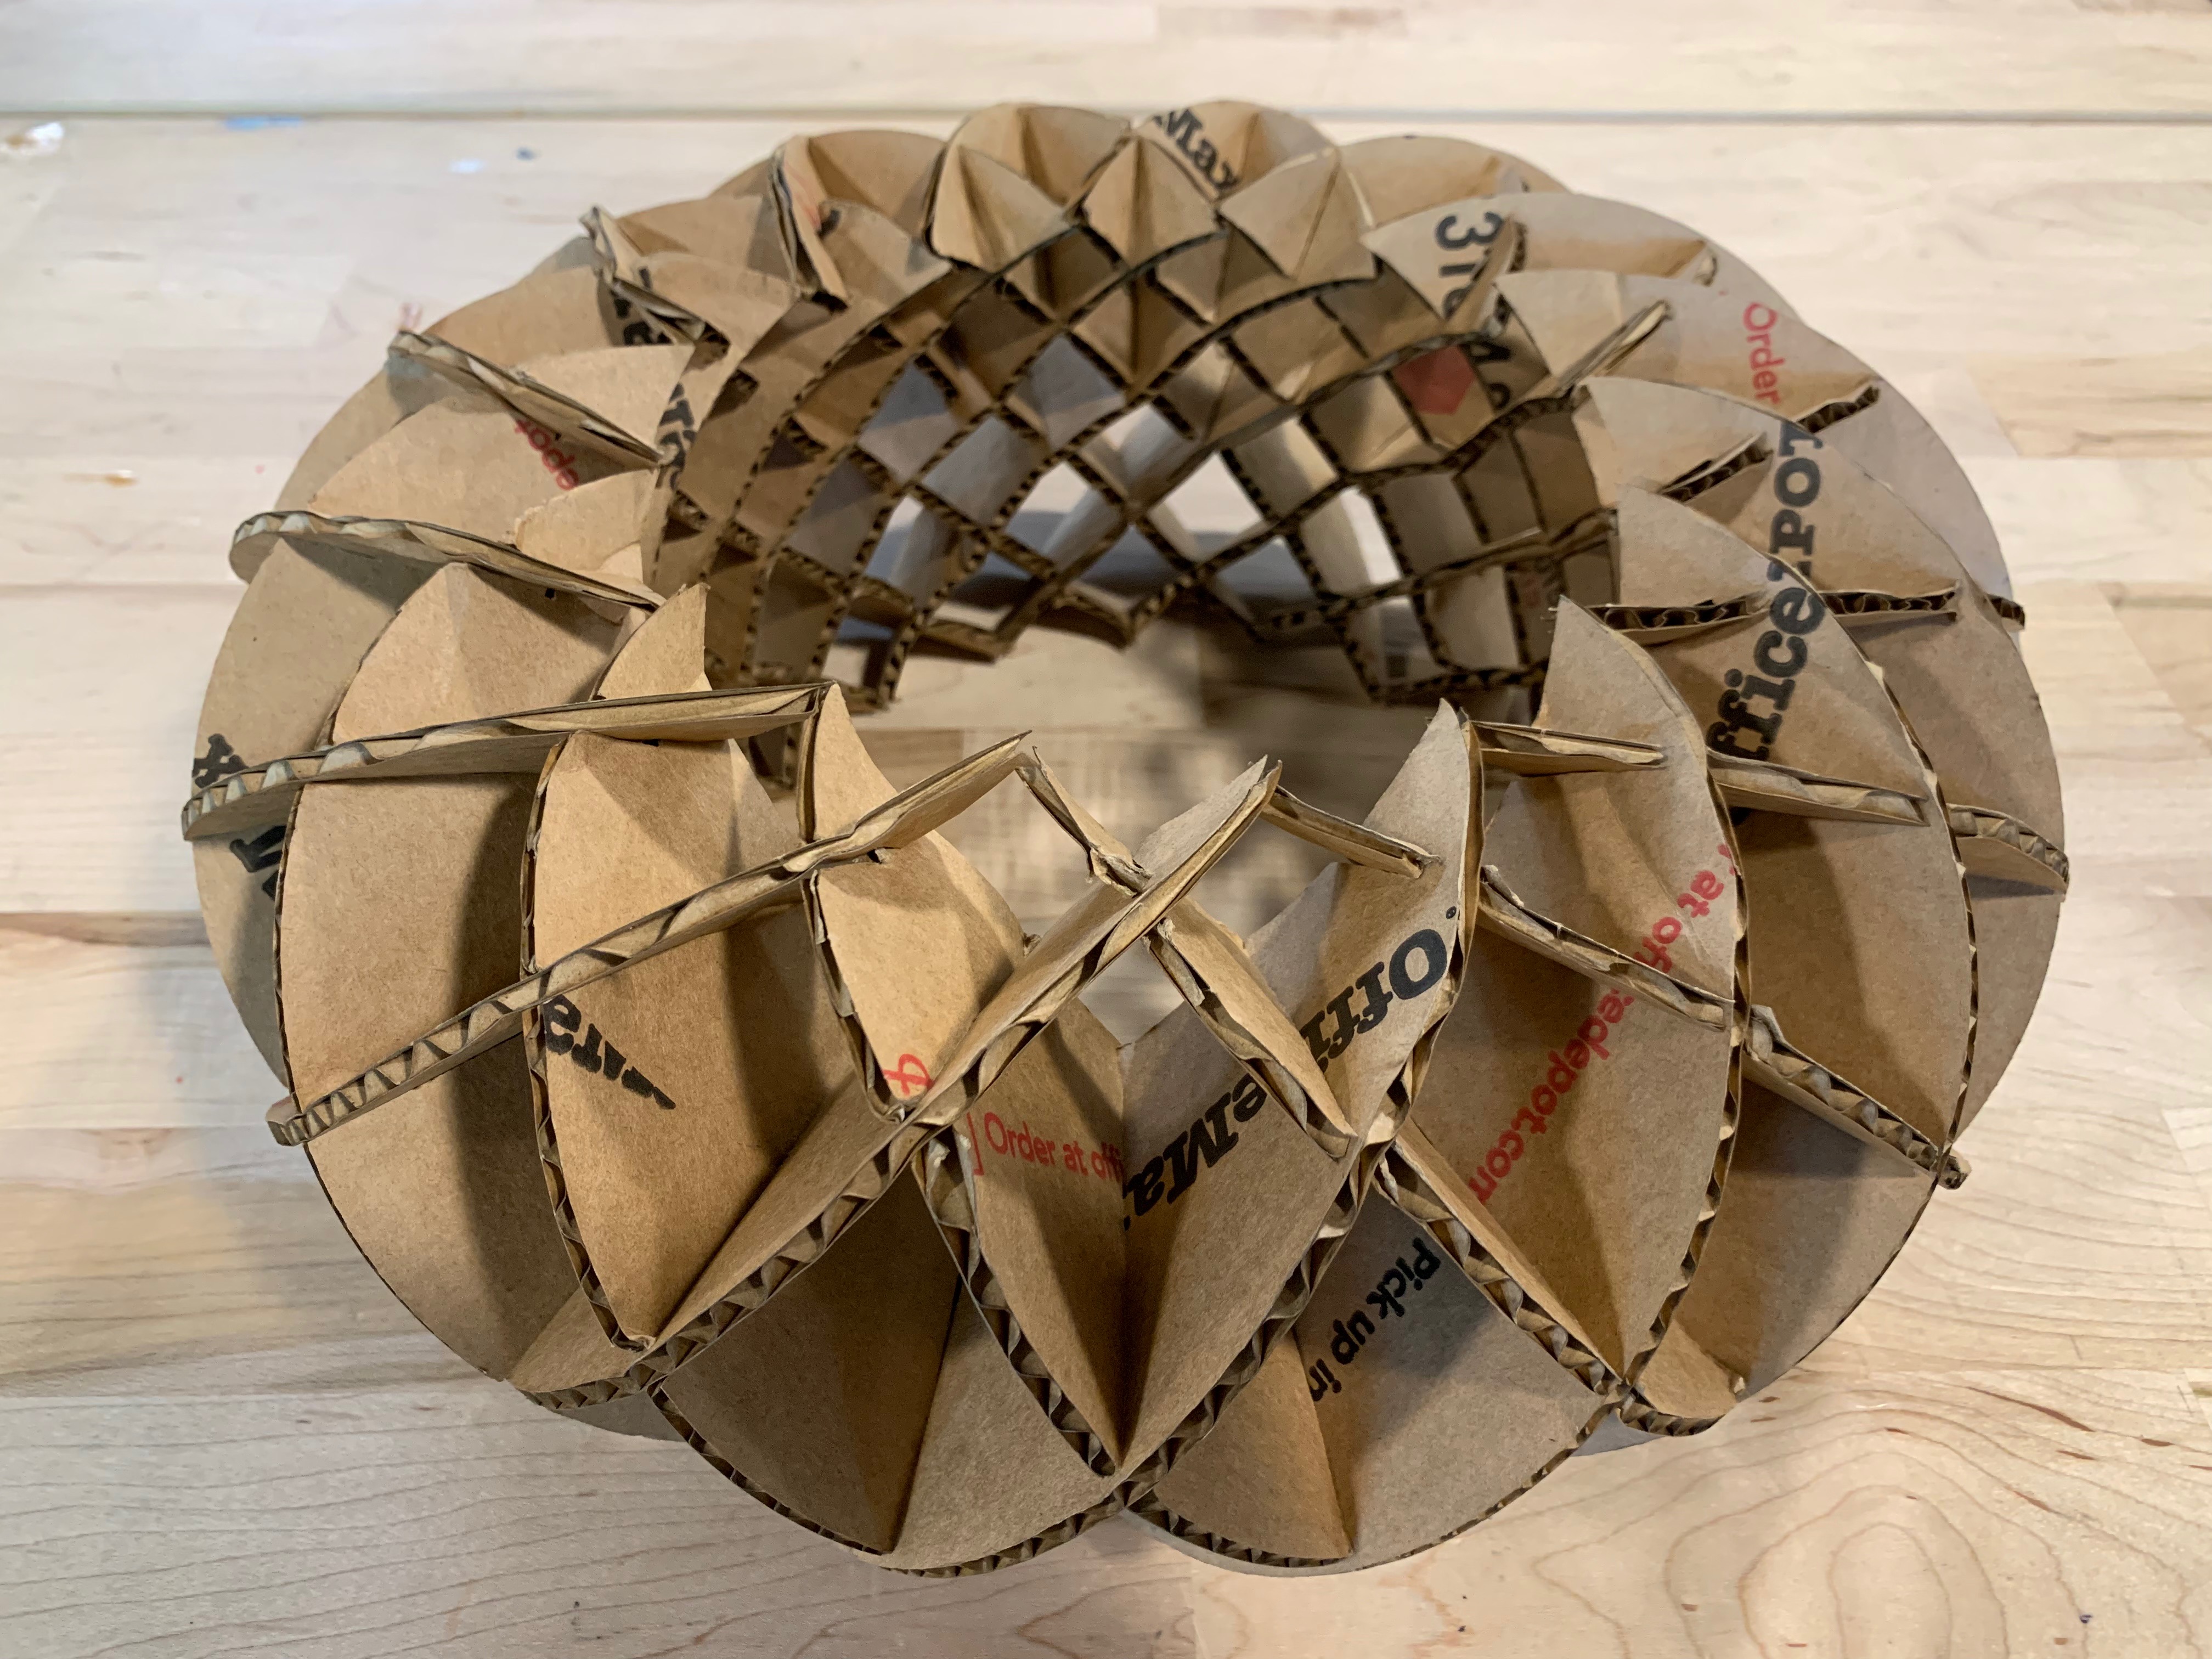 a round sculpture made of brown cardboard pieces laser cut into moon shapes with slots in them.